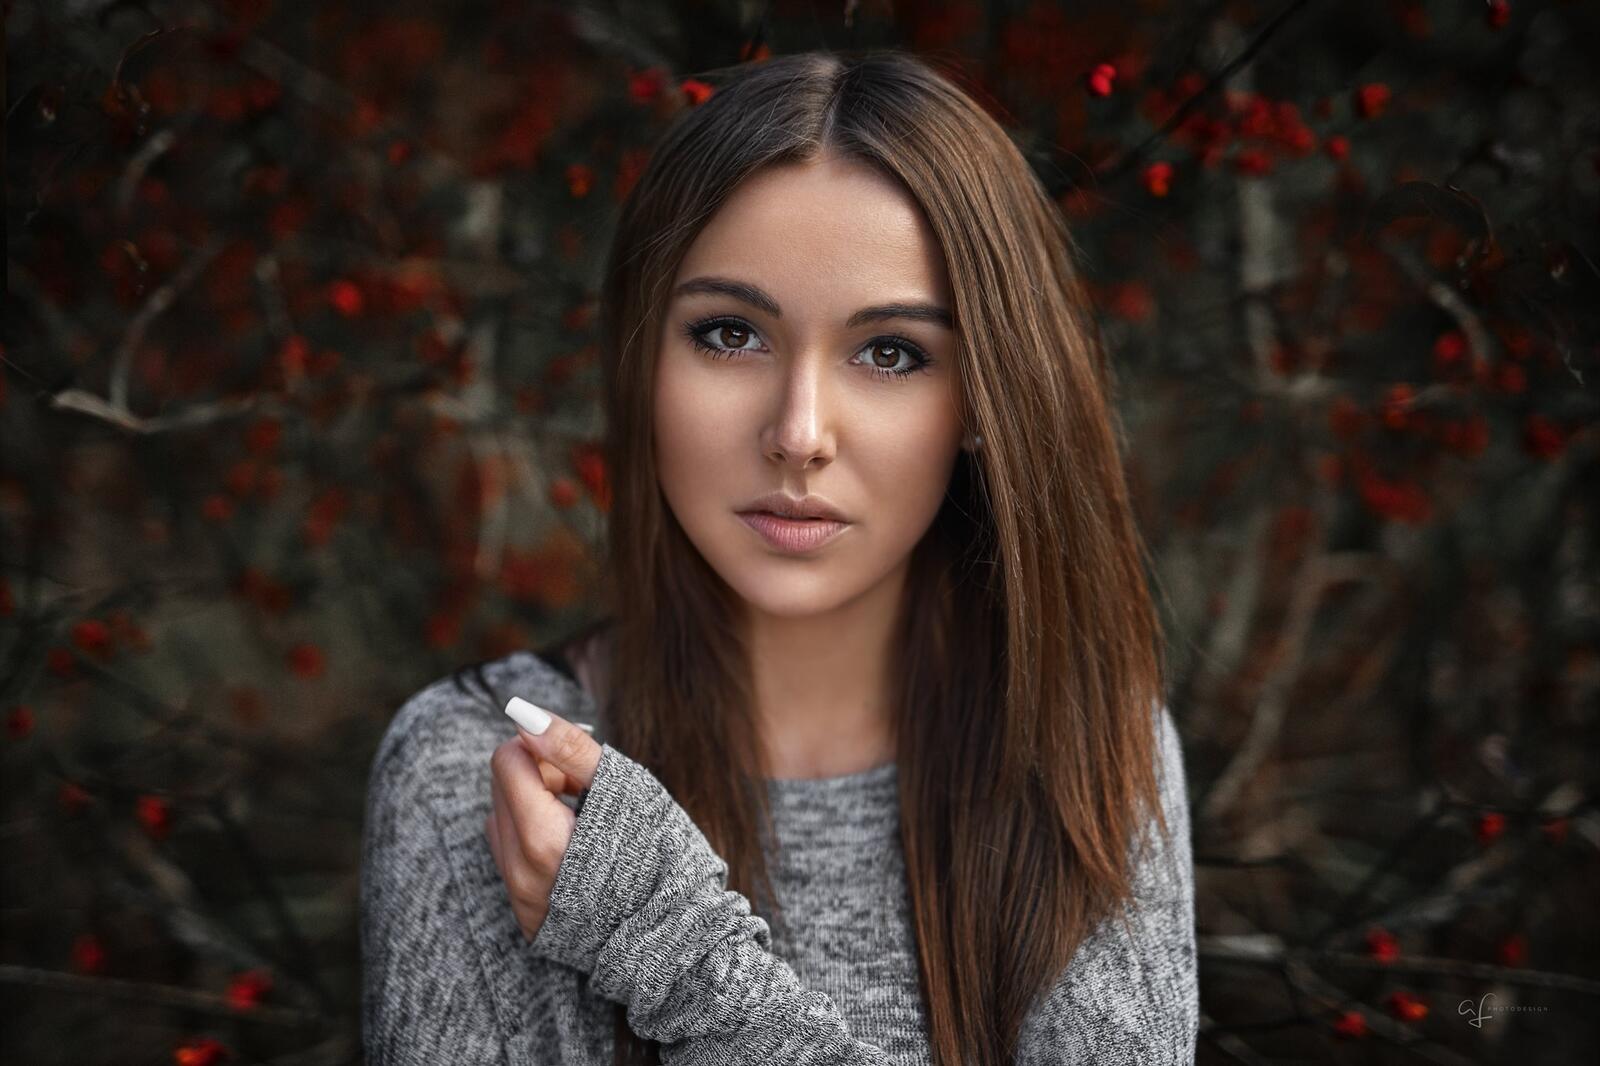 Free photo Brunette with long hair in a gray sweater